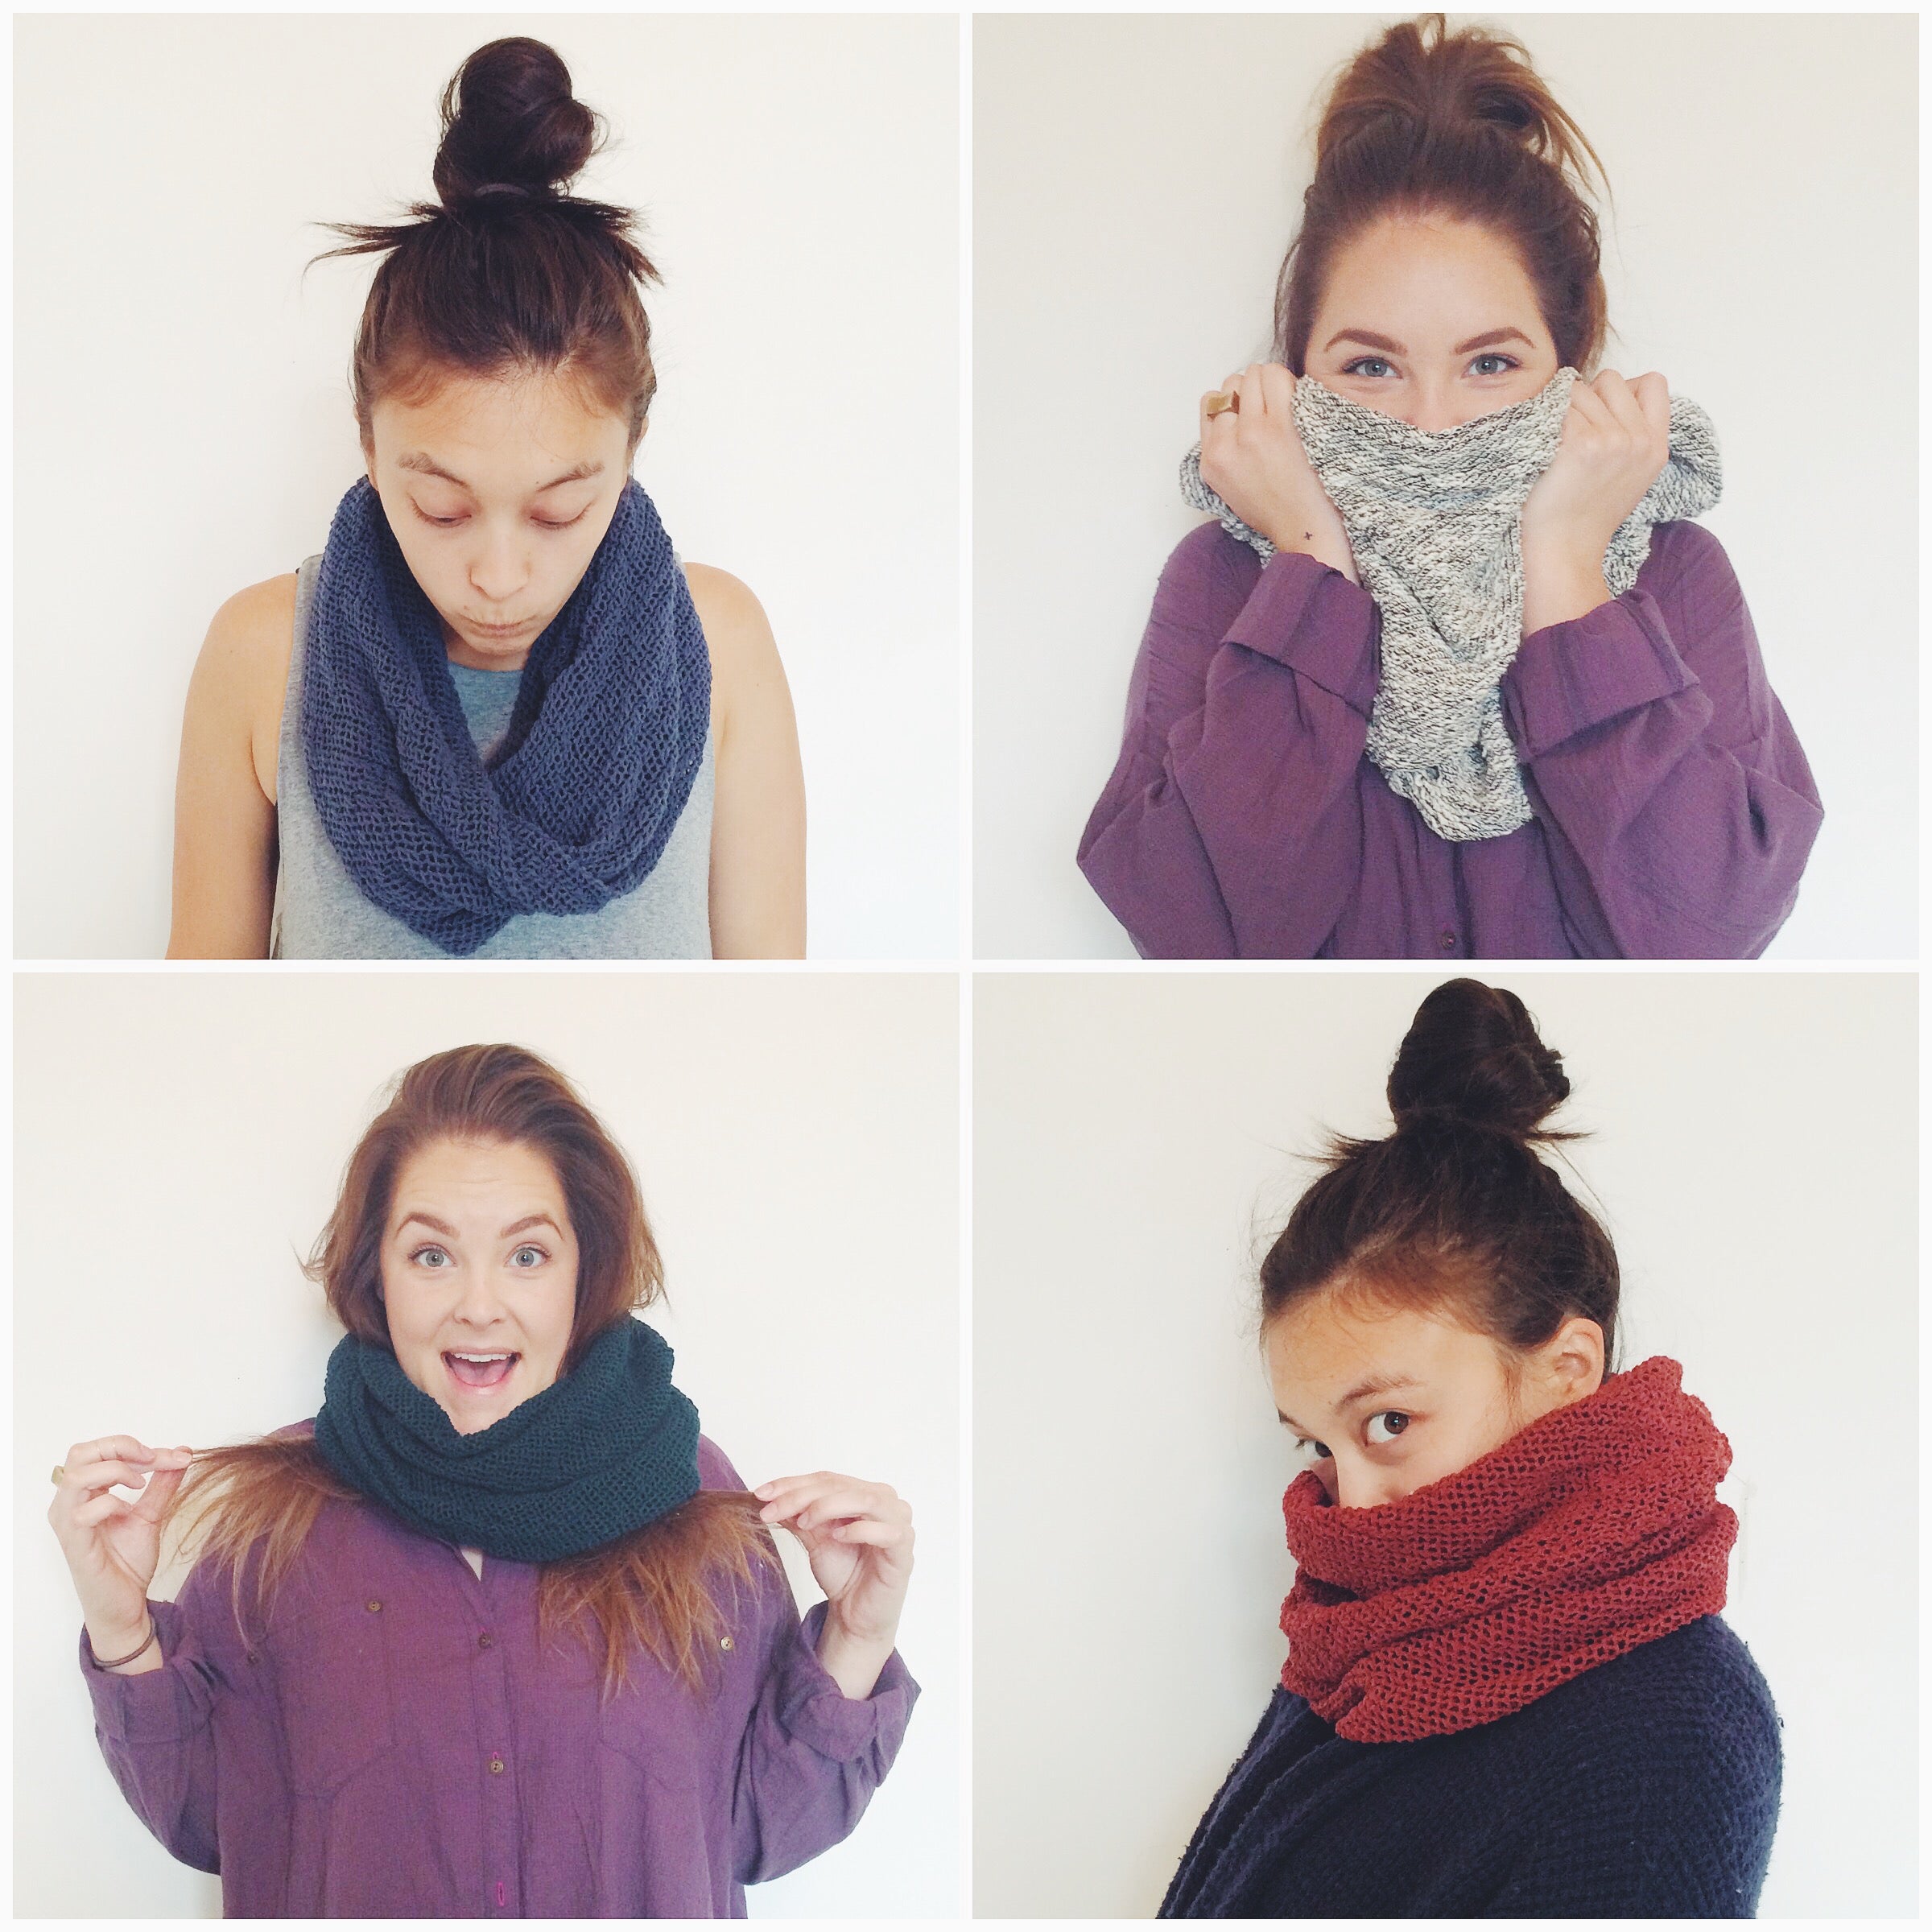 Curator scarves